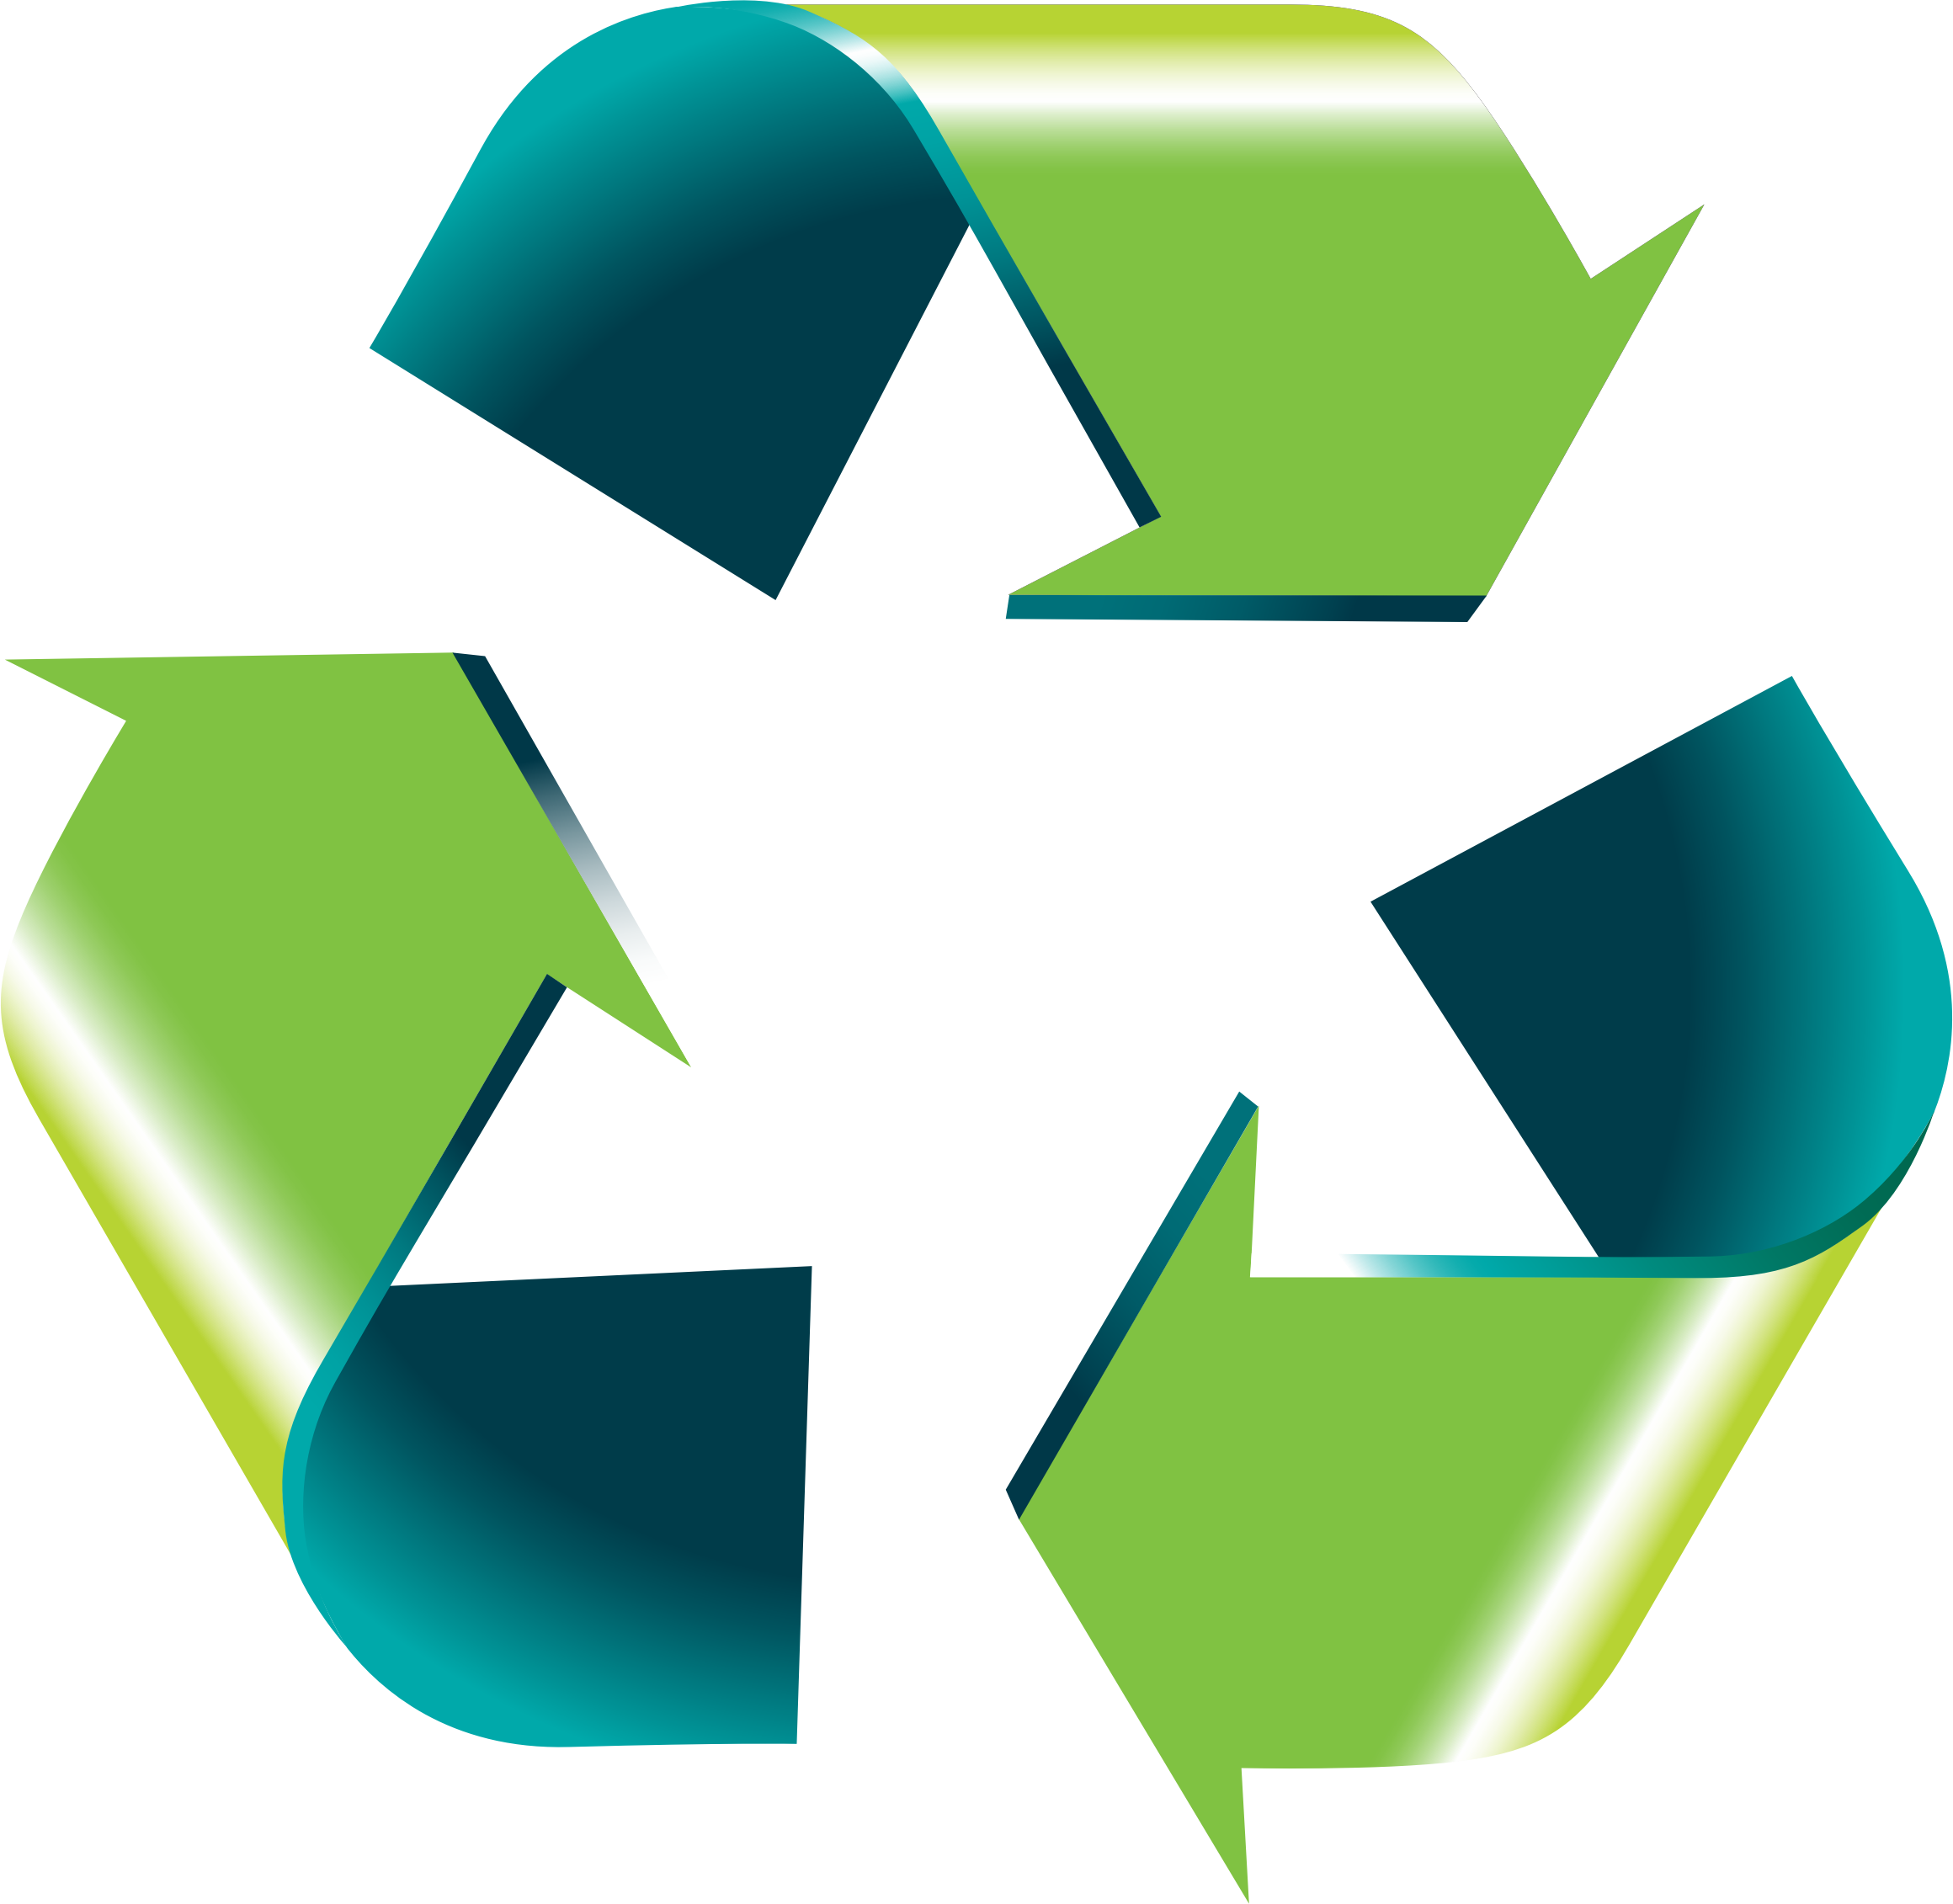 Reduce Reuse Recycle Logo | F